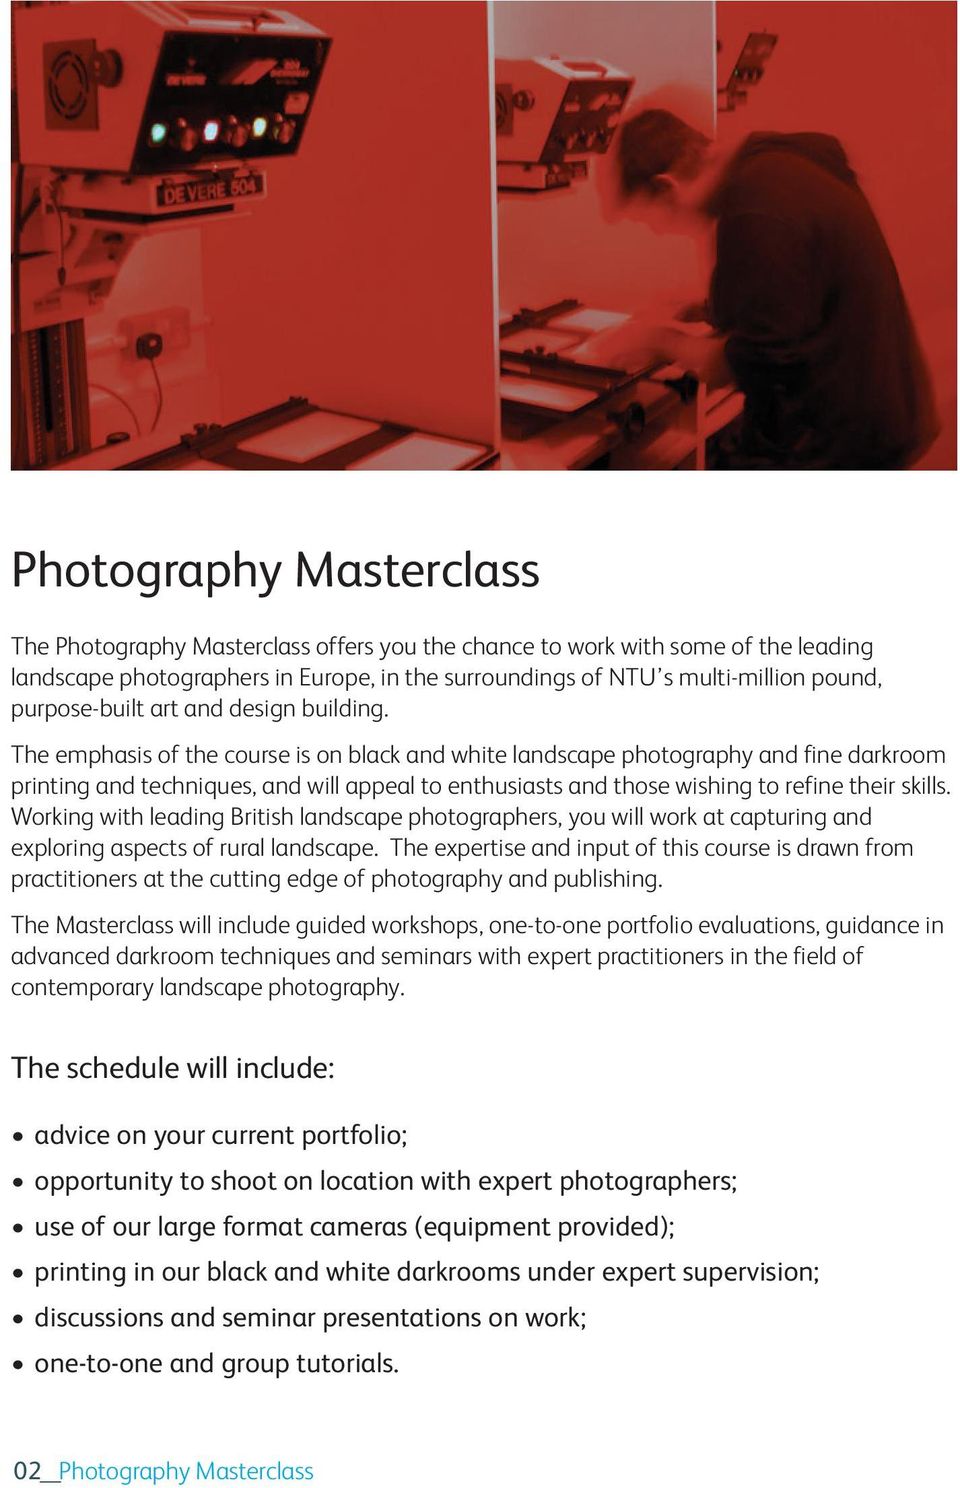 The emphasis of the course is on black and white landscape photography and fine darkroom printing and techniques, and will appeal to enthusiasts and those wishing to refine their skills.